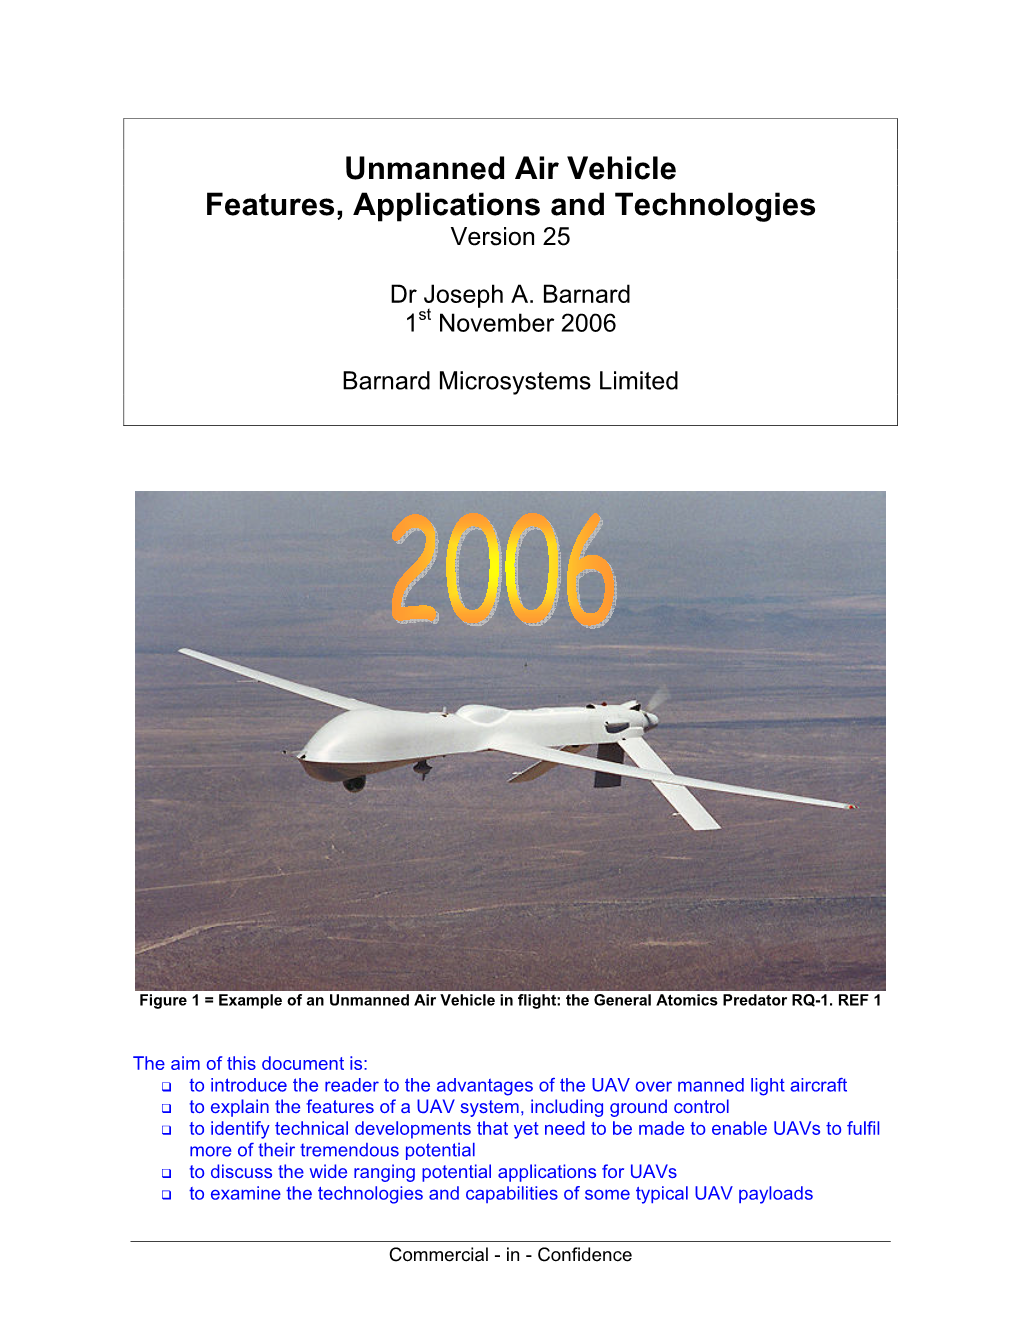 Unmanned Air Vehicle Features, Applications and Technologies Version 25